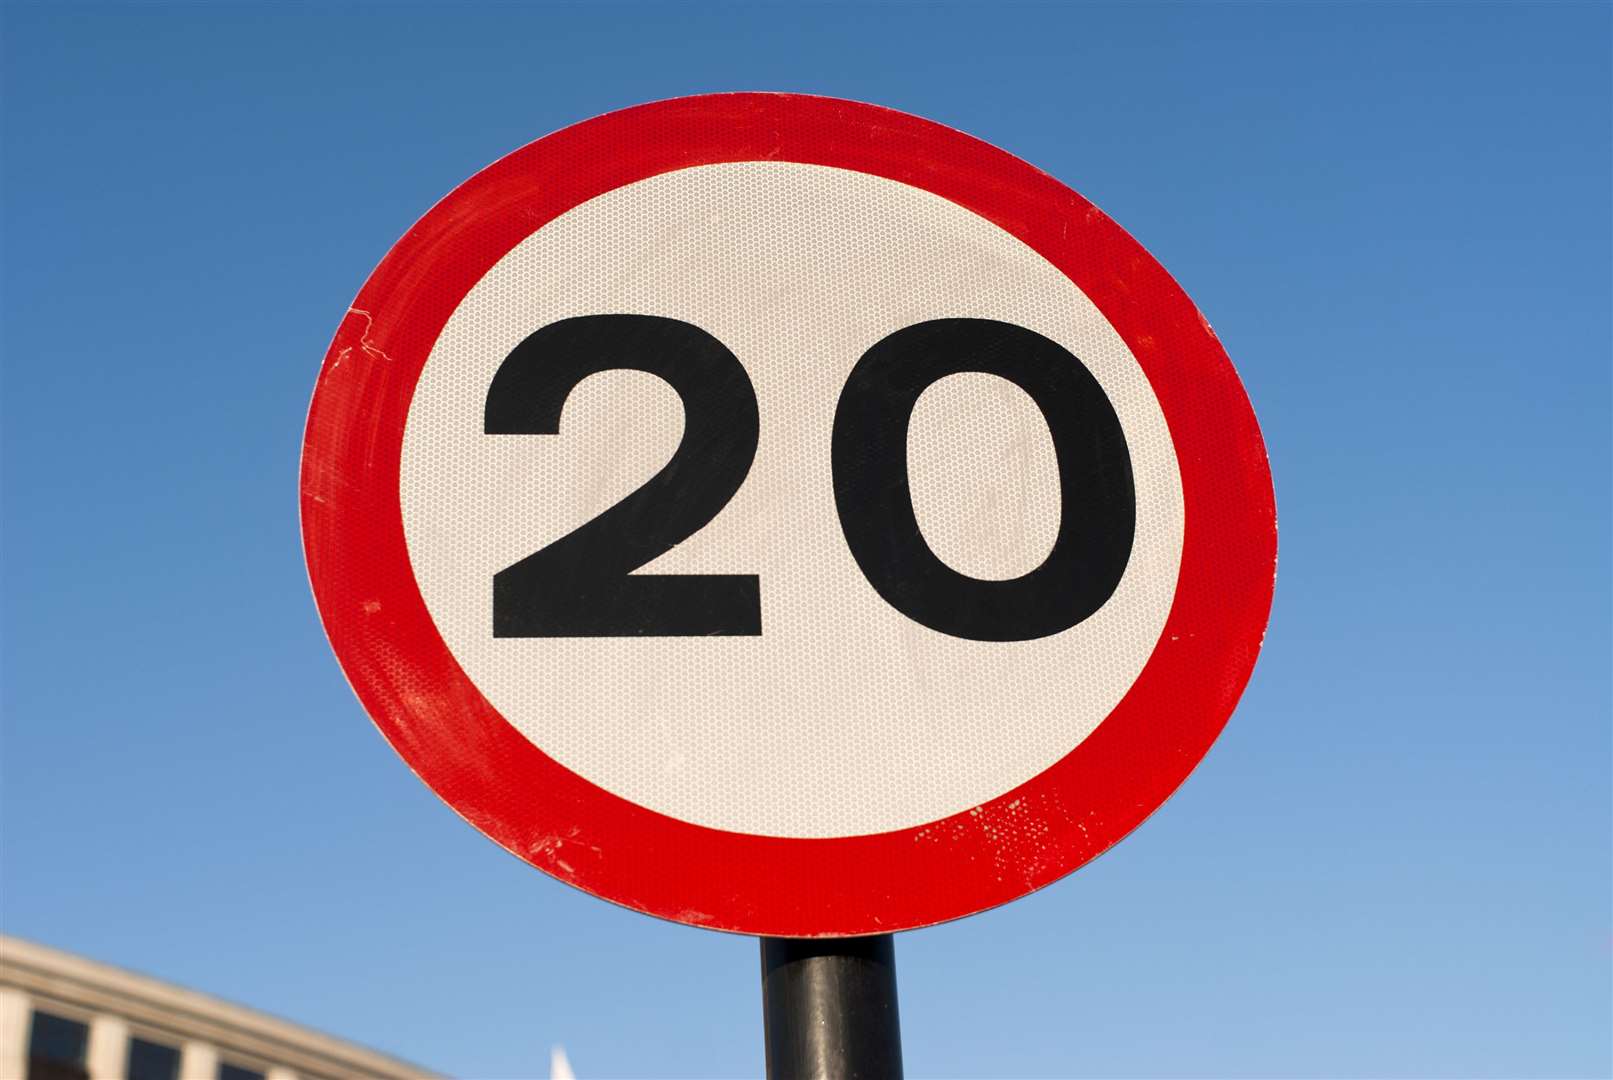 Caithness will have seventeen villages included as part of the 20mph speed limit trial